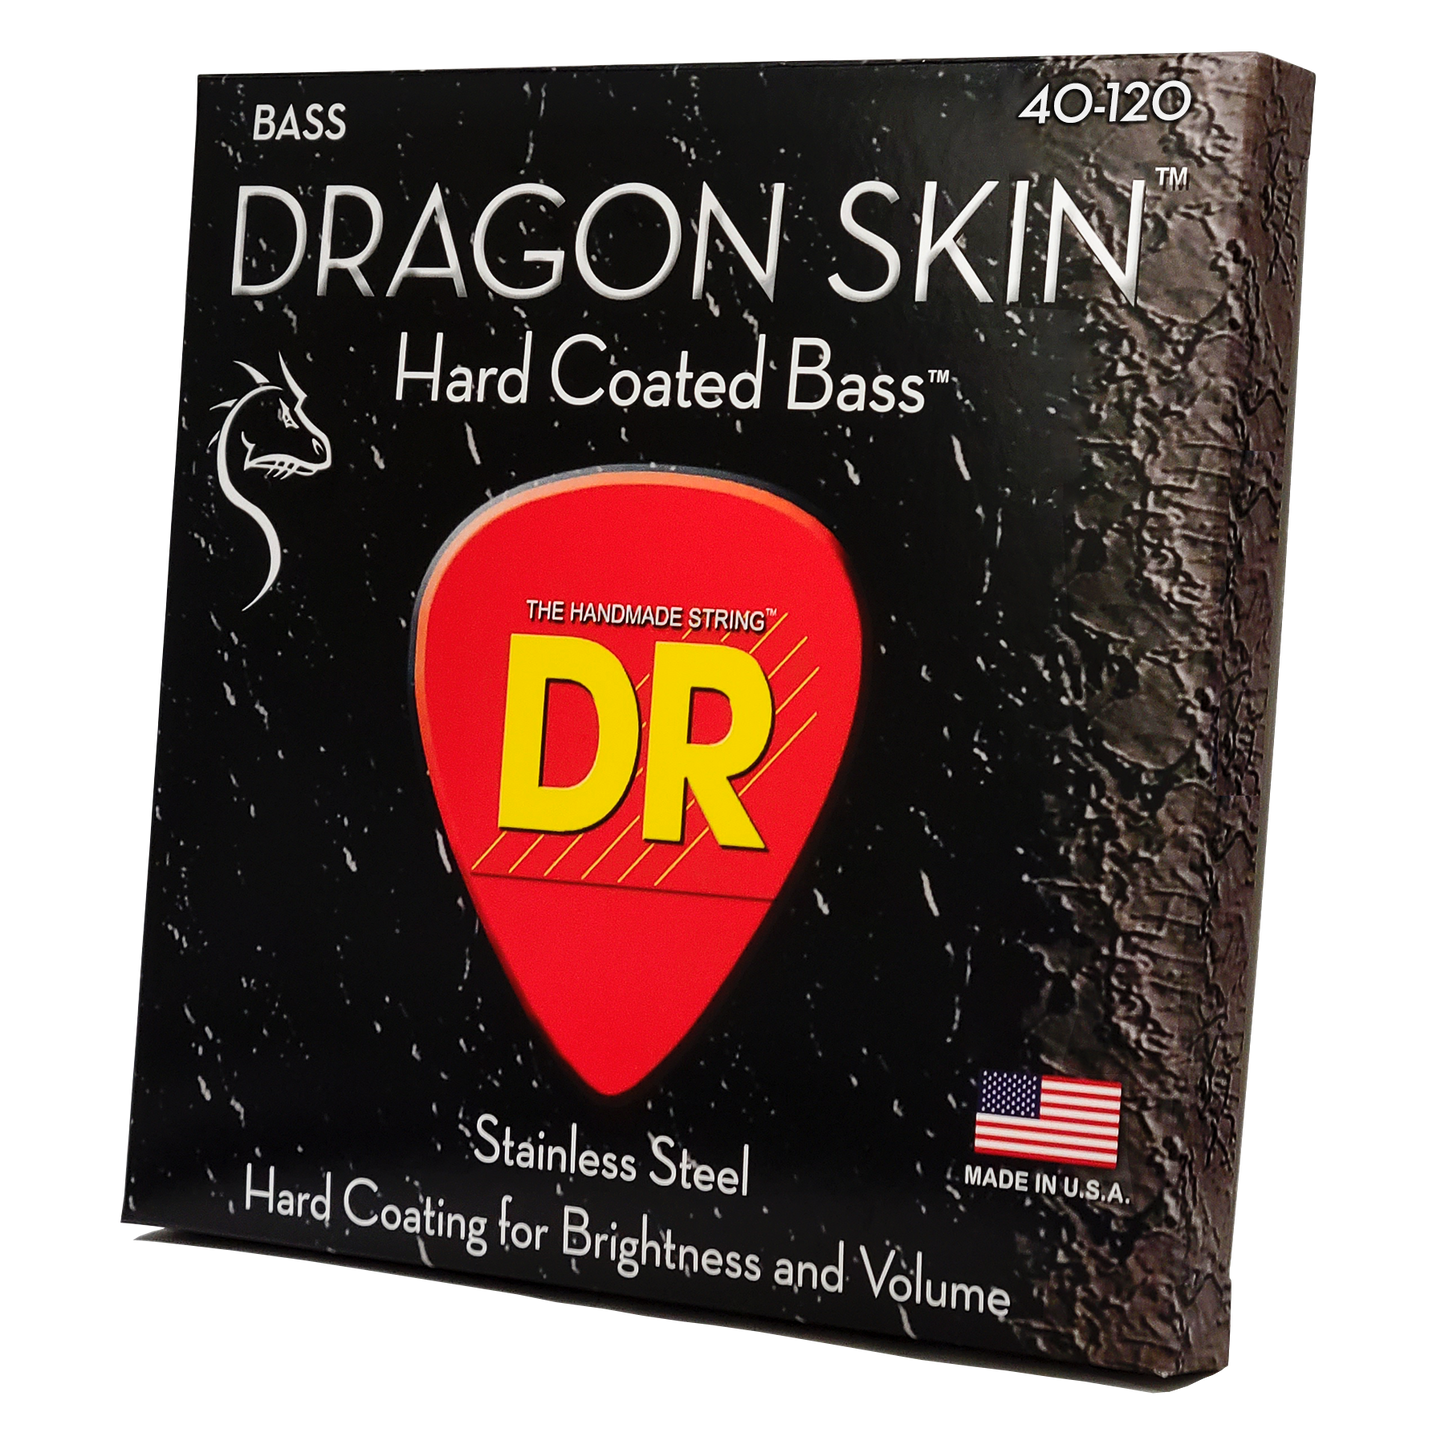 DR Strings DR Dragon Skin Coated Stainless Steel Electric Bass Strings Long Scale Set - 5-String 40-120 DSB5-40